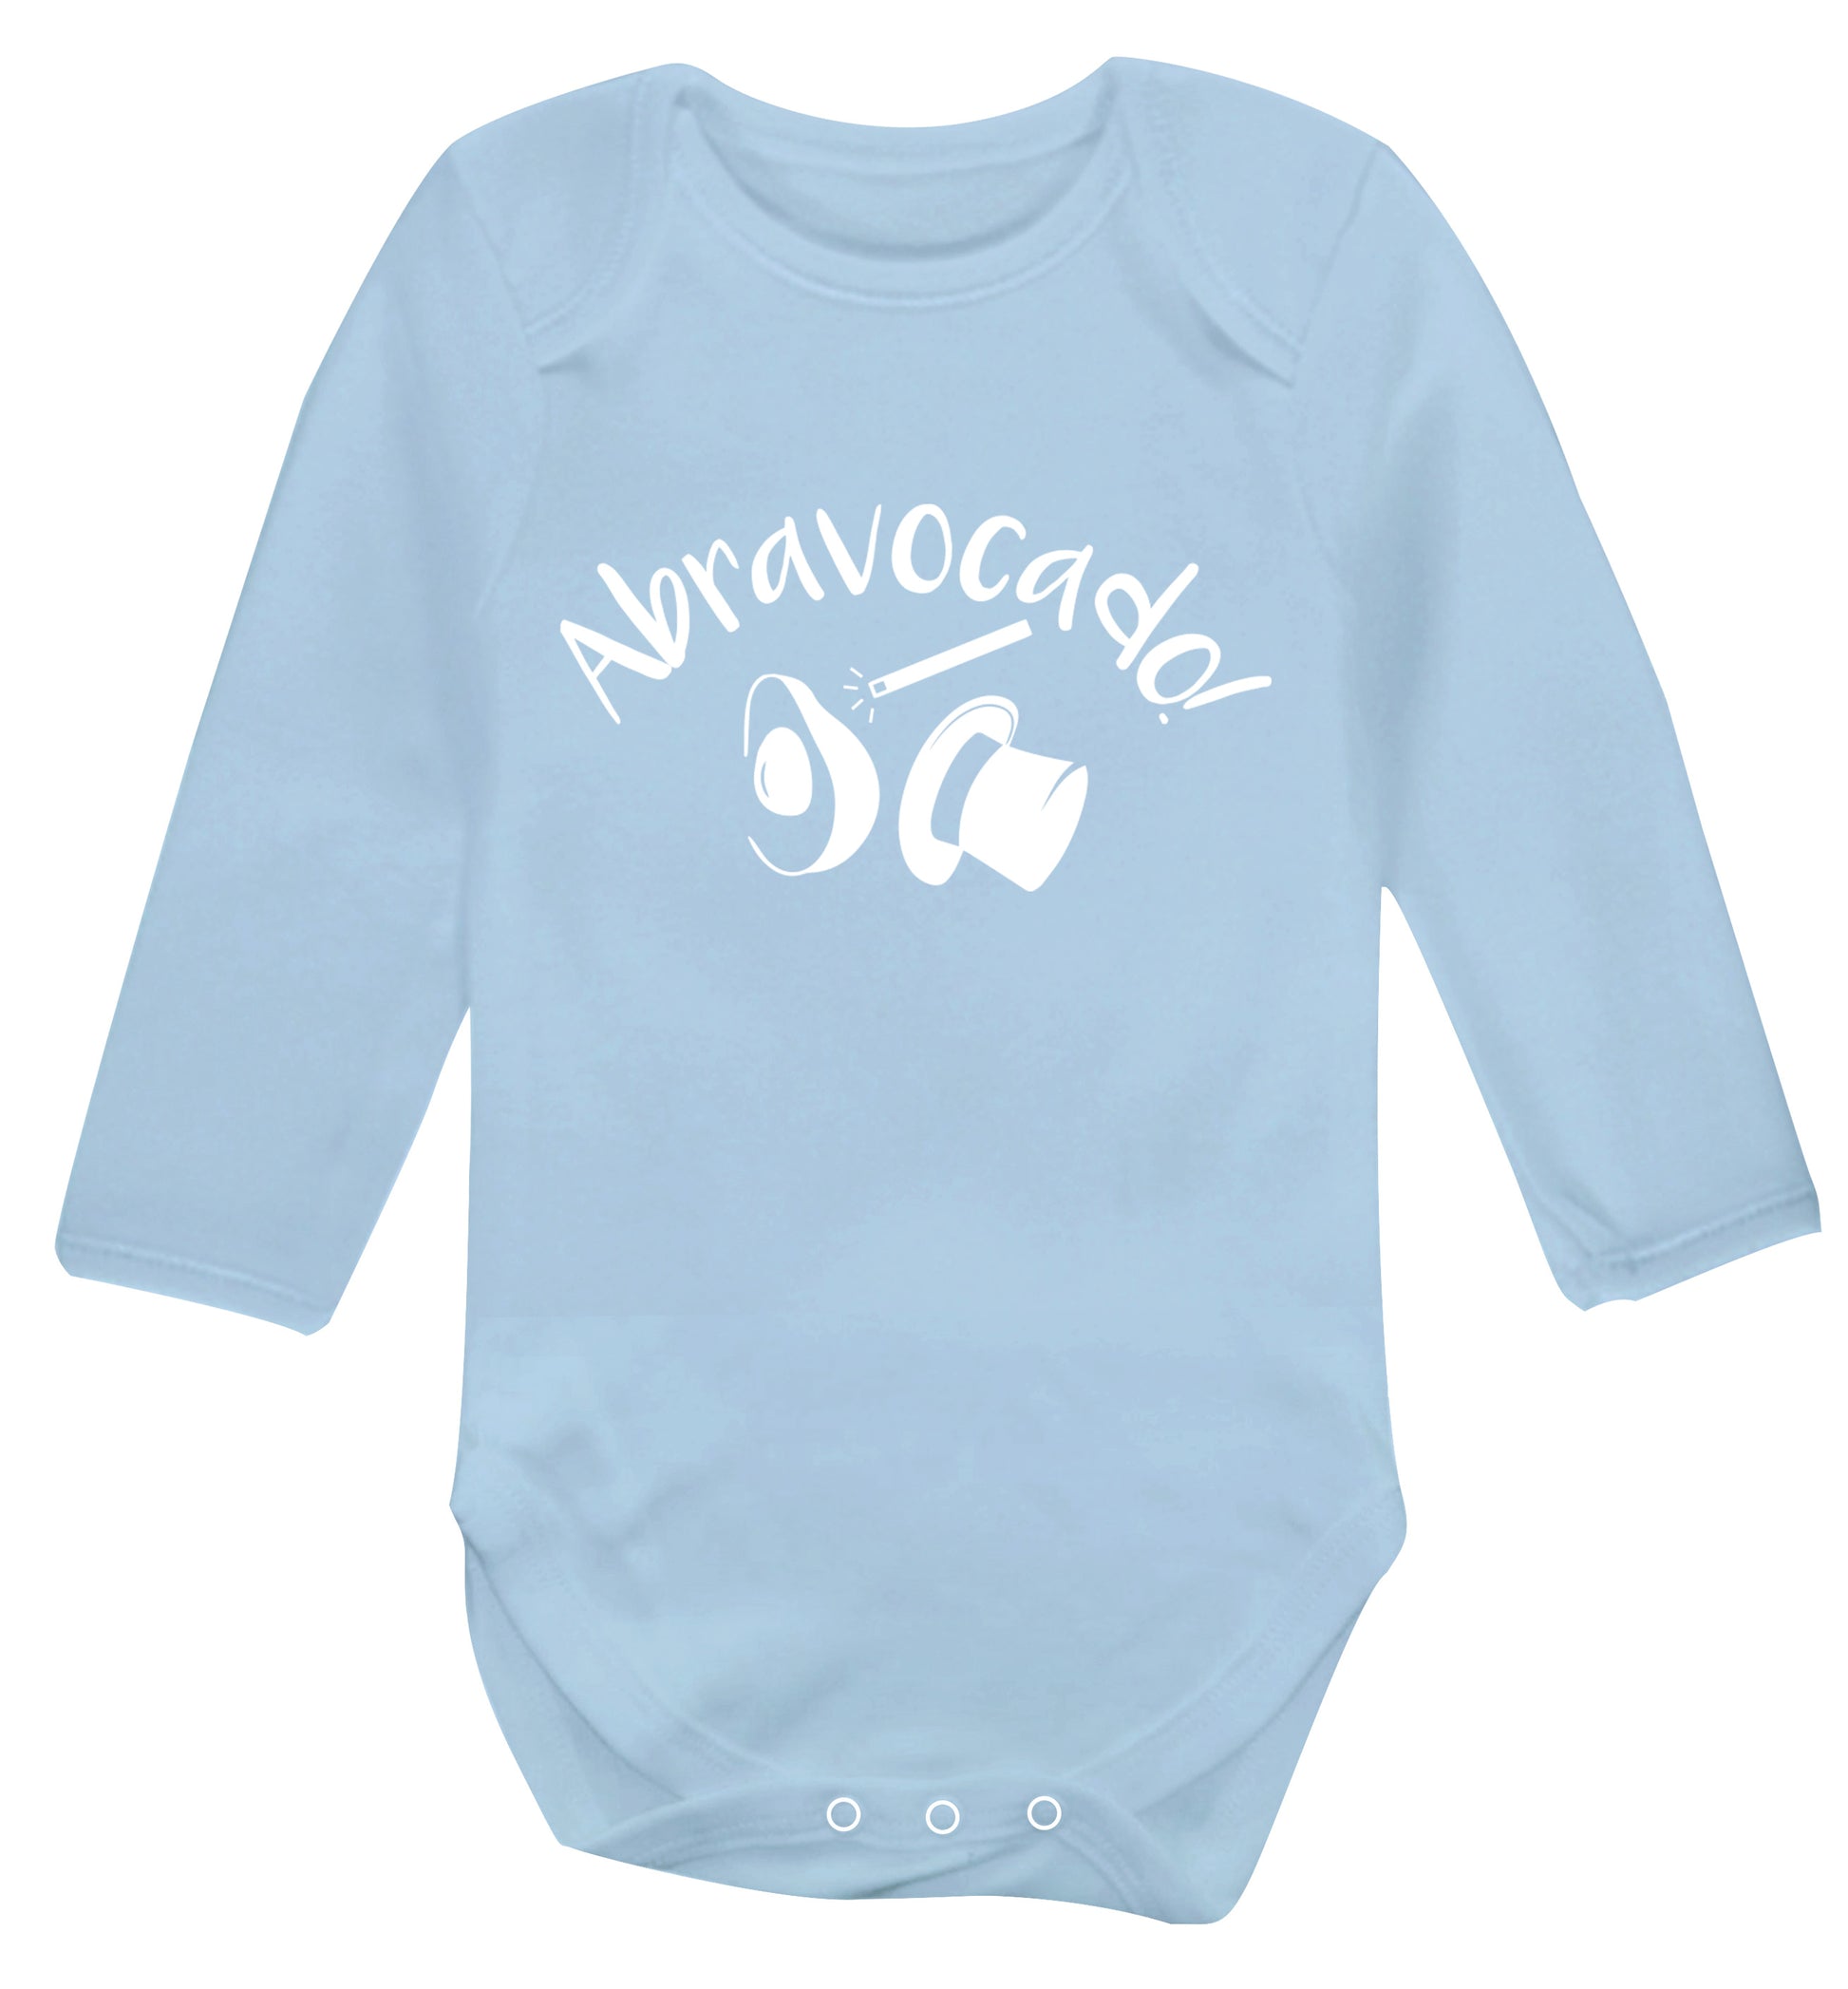 Abravocado Baby Vest long sleeved pale blue 6-12 months